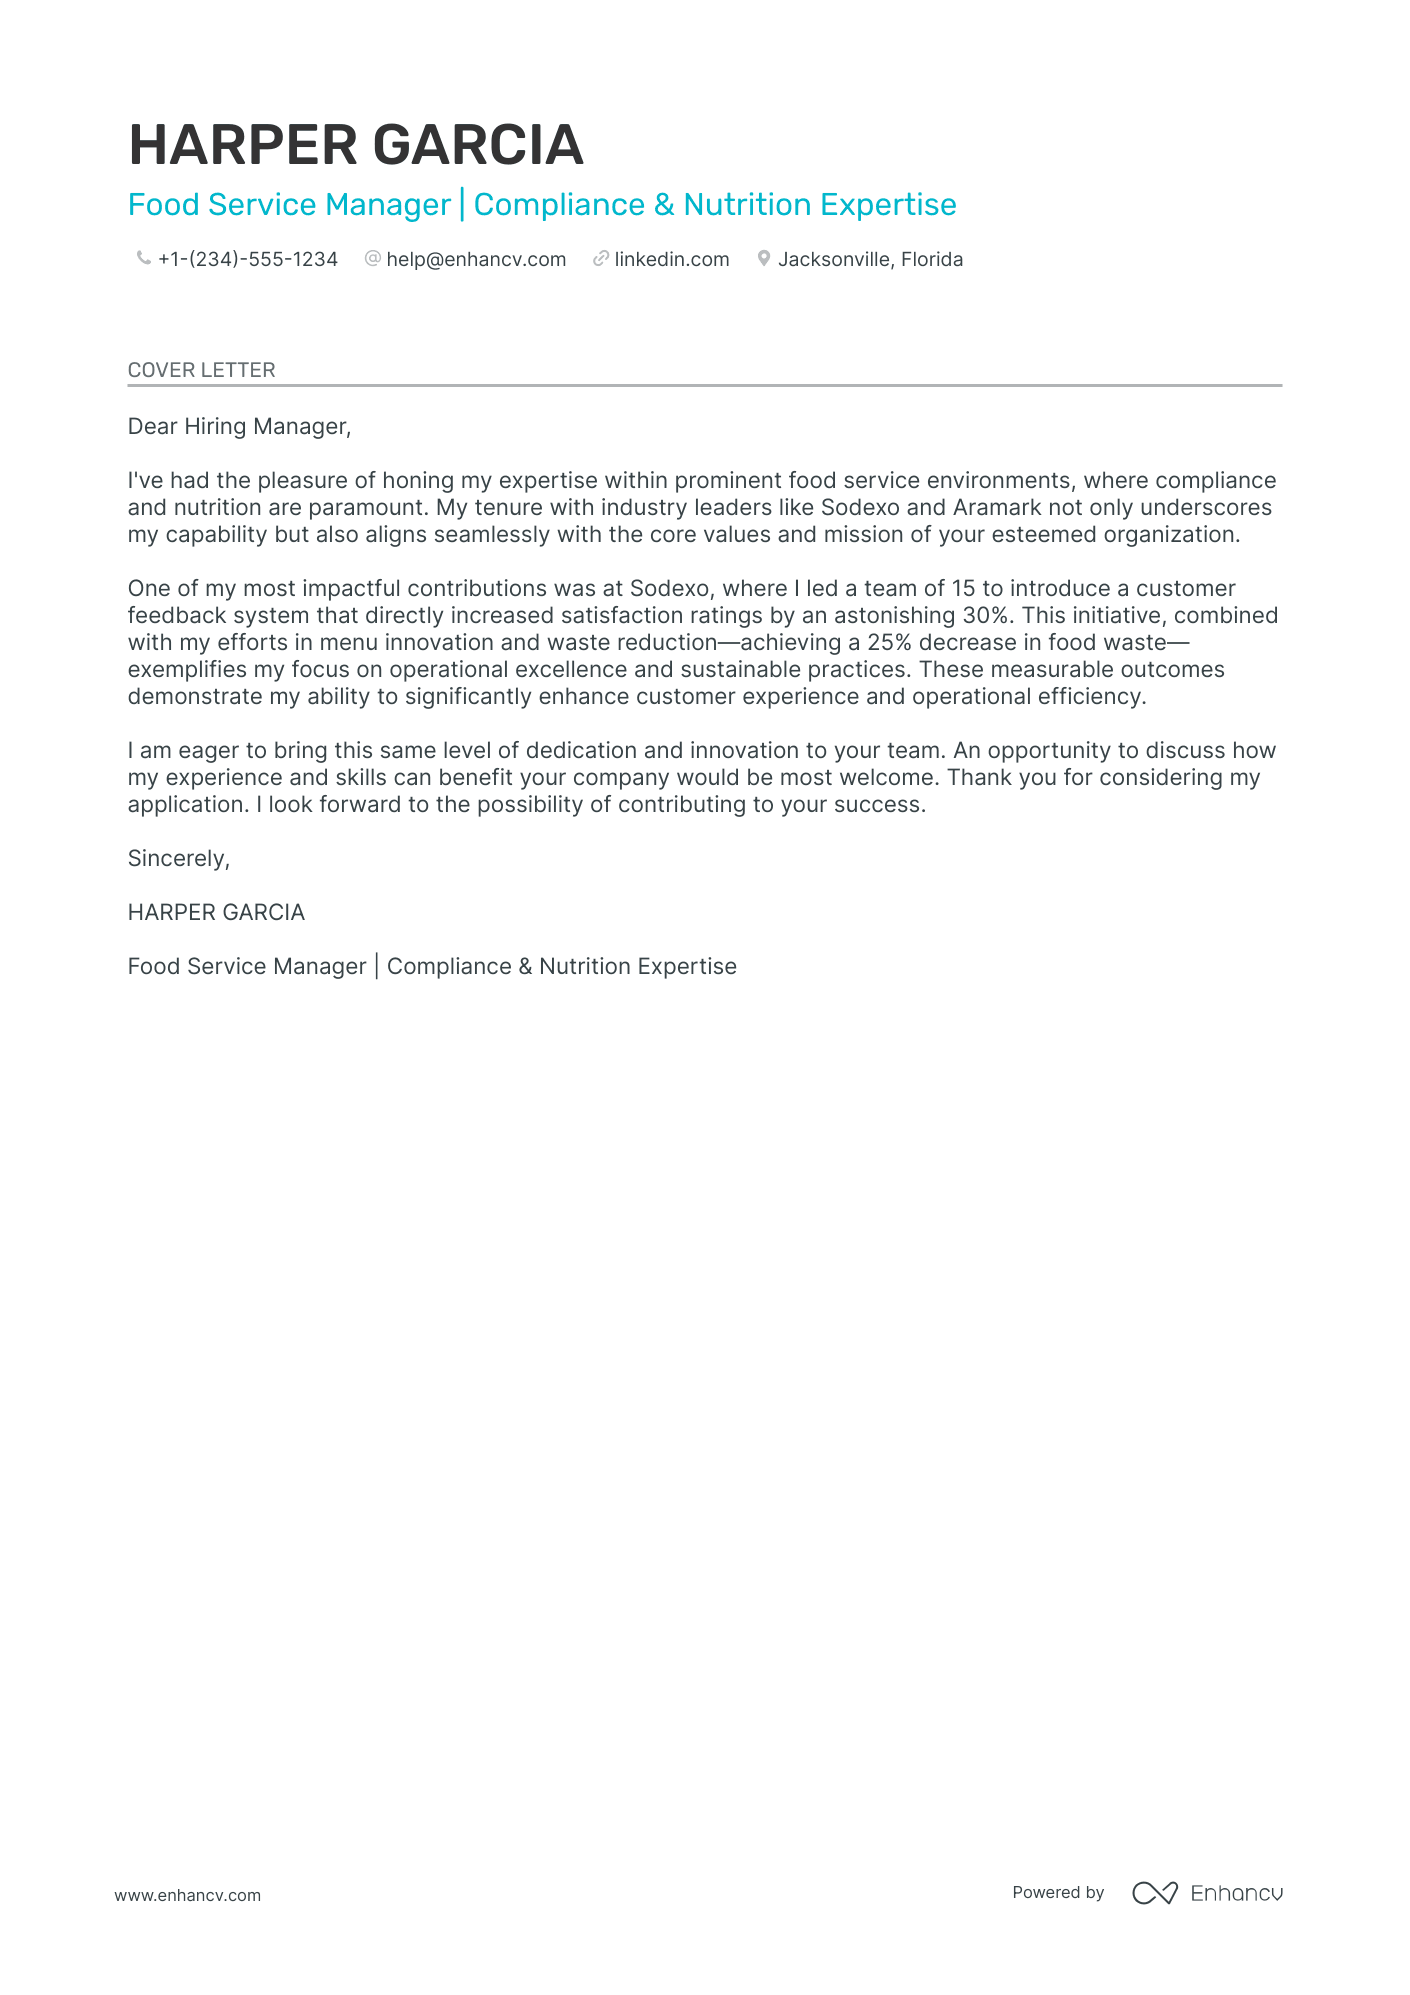 Food Service Manager cover letter